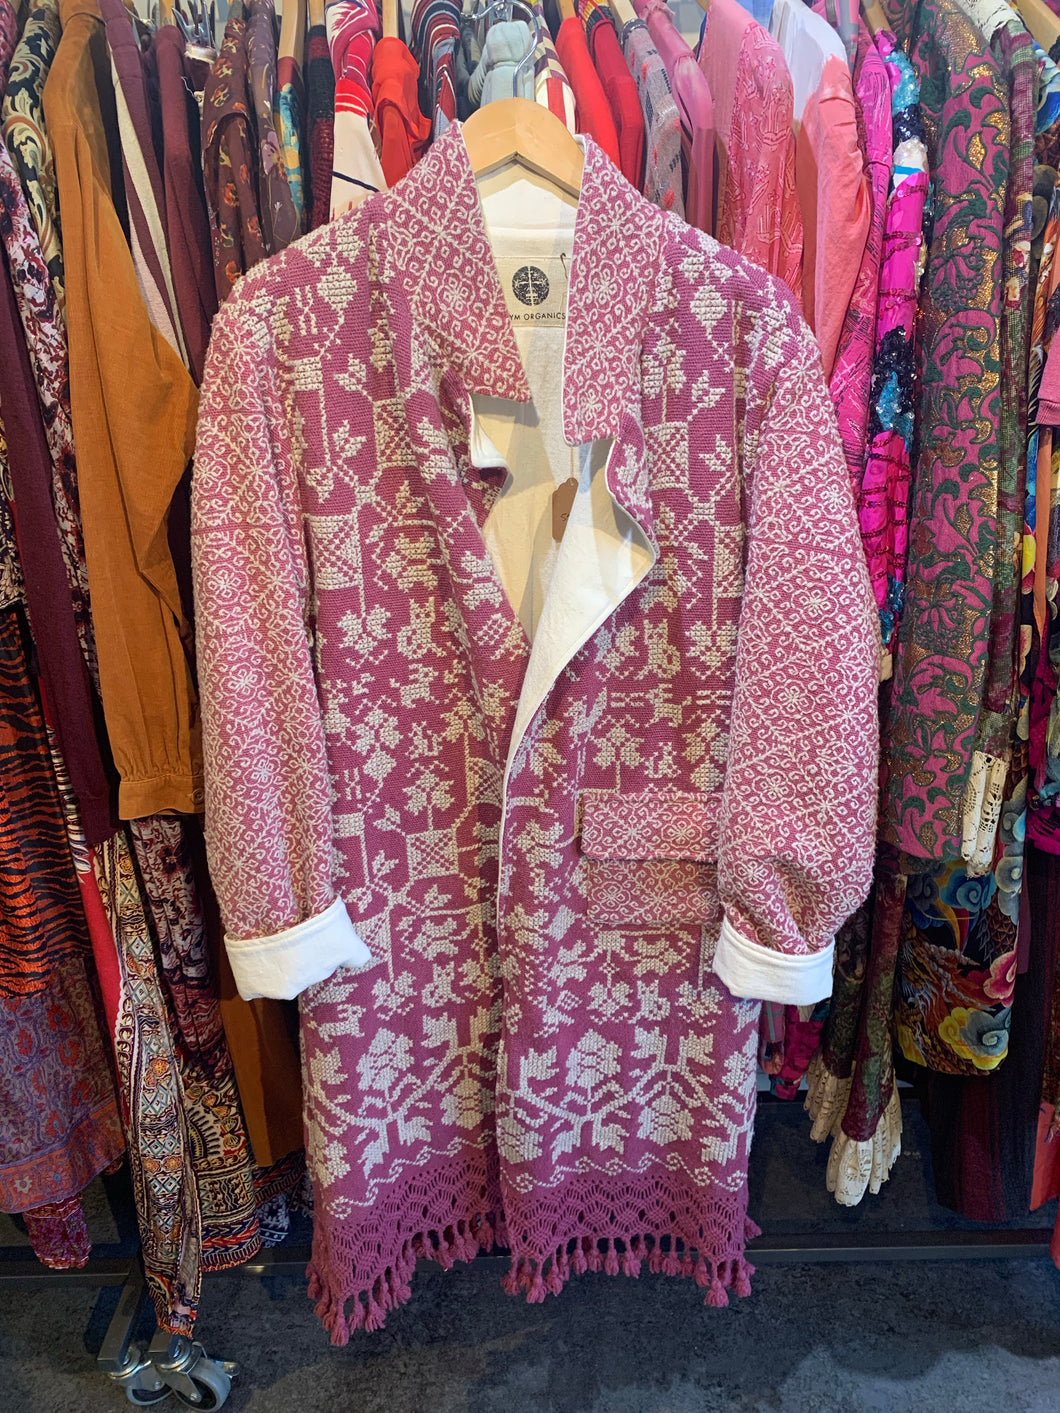 MYM Oragnics Handmade Embroidered Pink Coat - The Curatorial Dept.